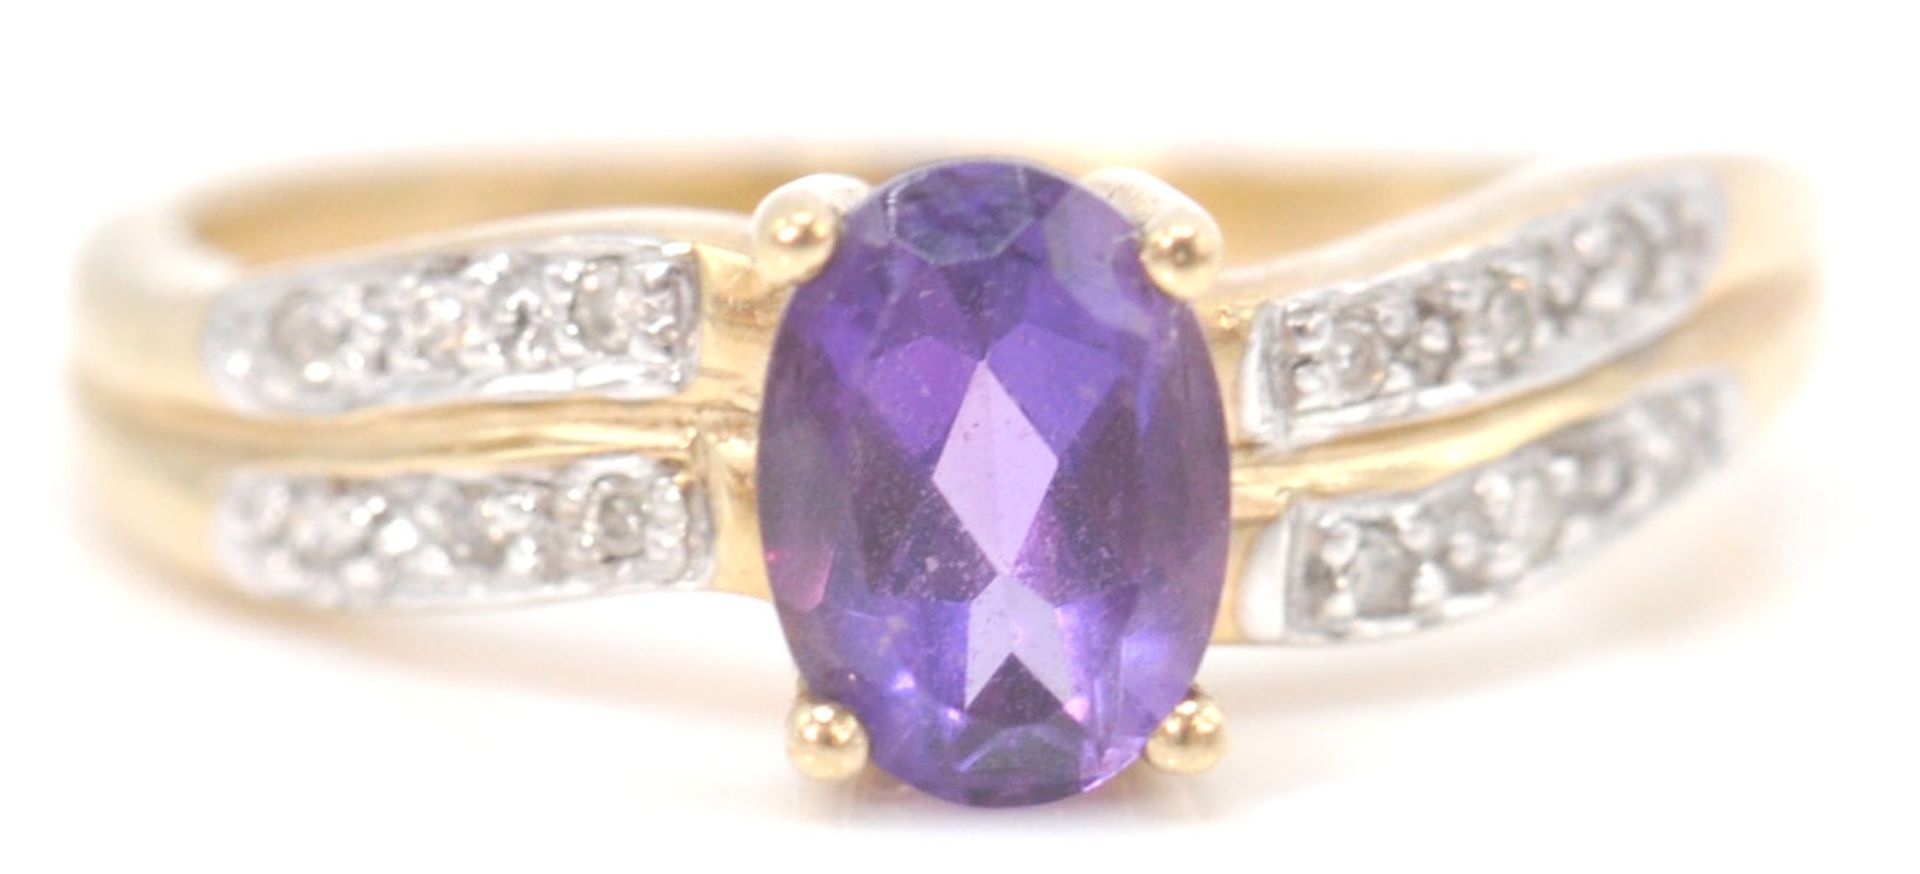 A 9ct gold hallmarked amethyst and white stone ring. The oval mixed cut amethyst with white stones